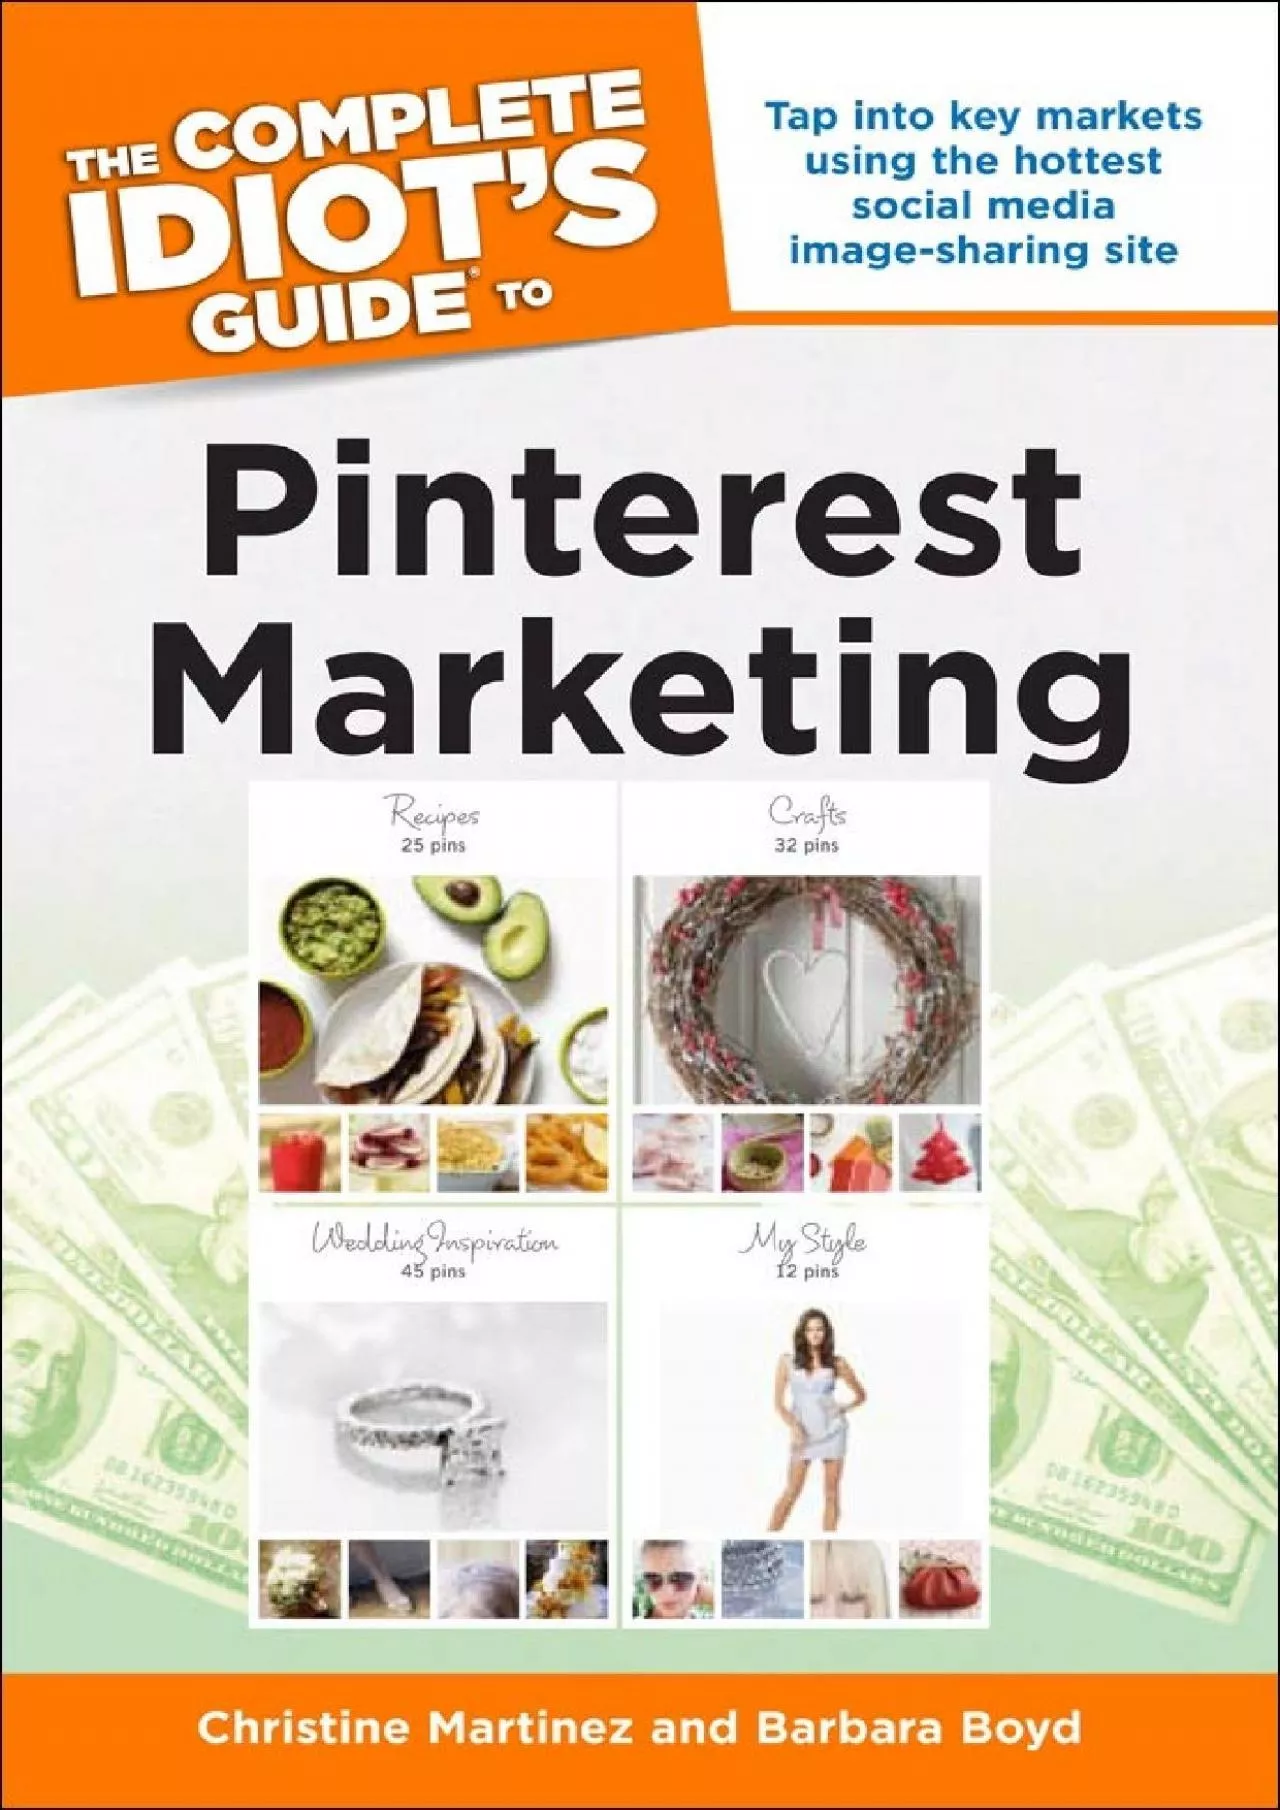 The Complete Idiot\'s Guide to Pinterest Marketing: Tap into Key Markets Using the Hottest